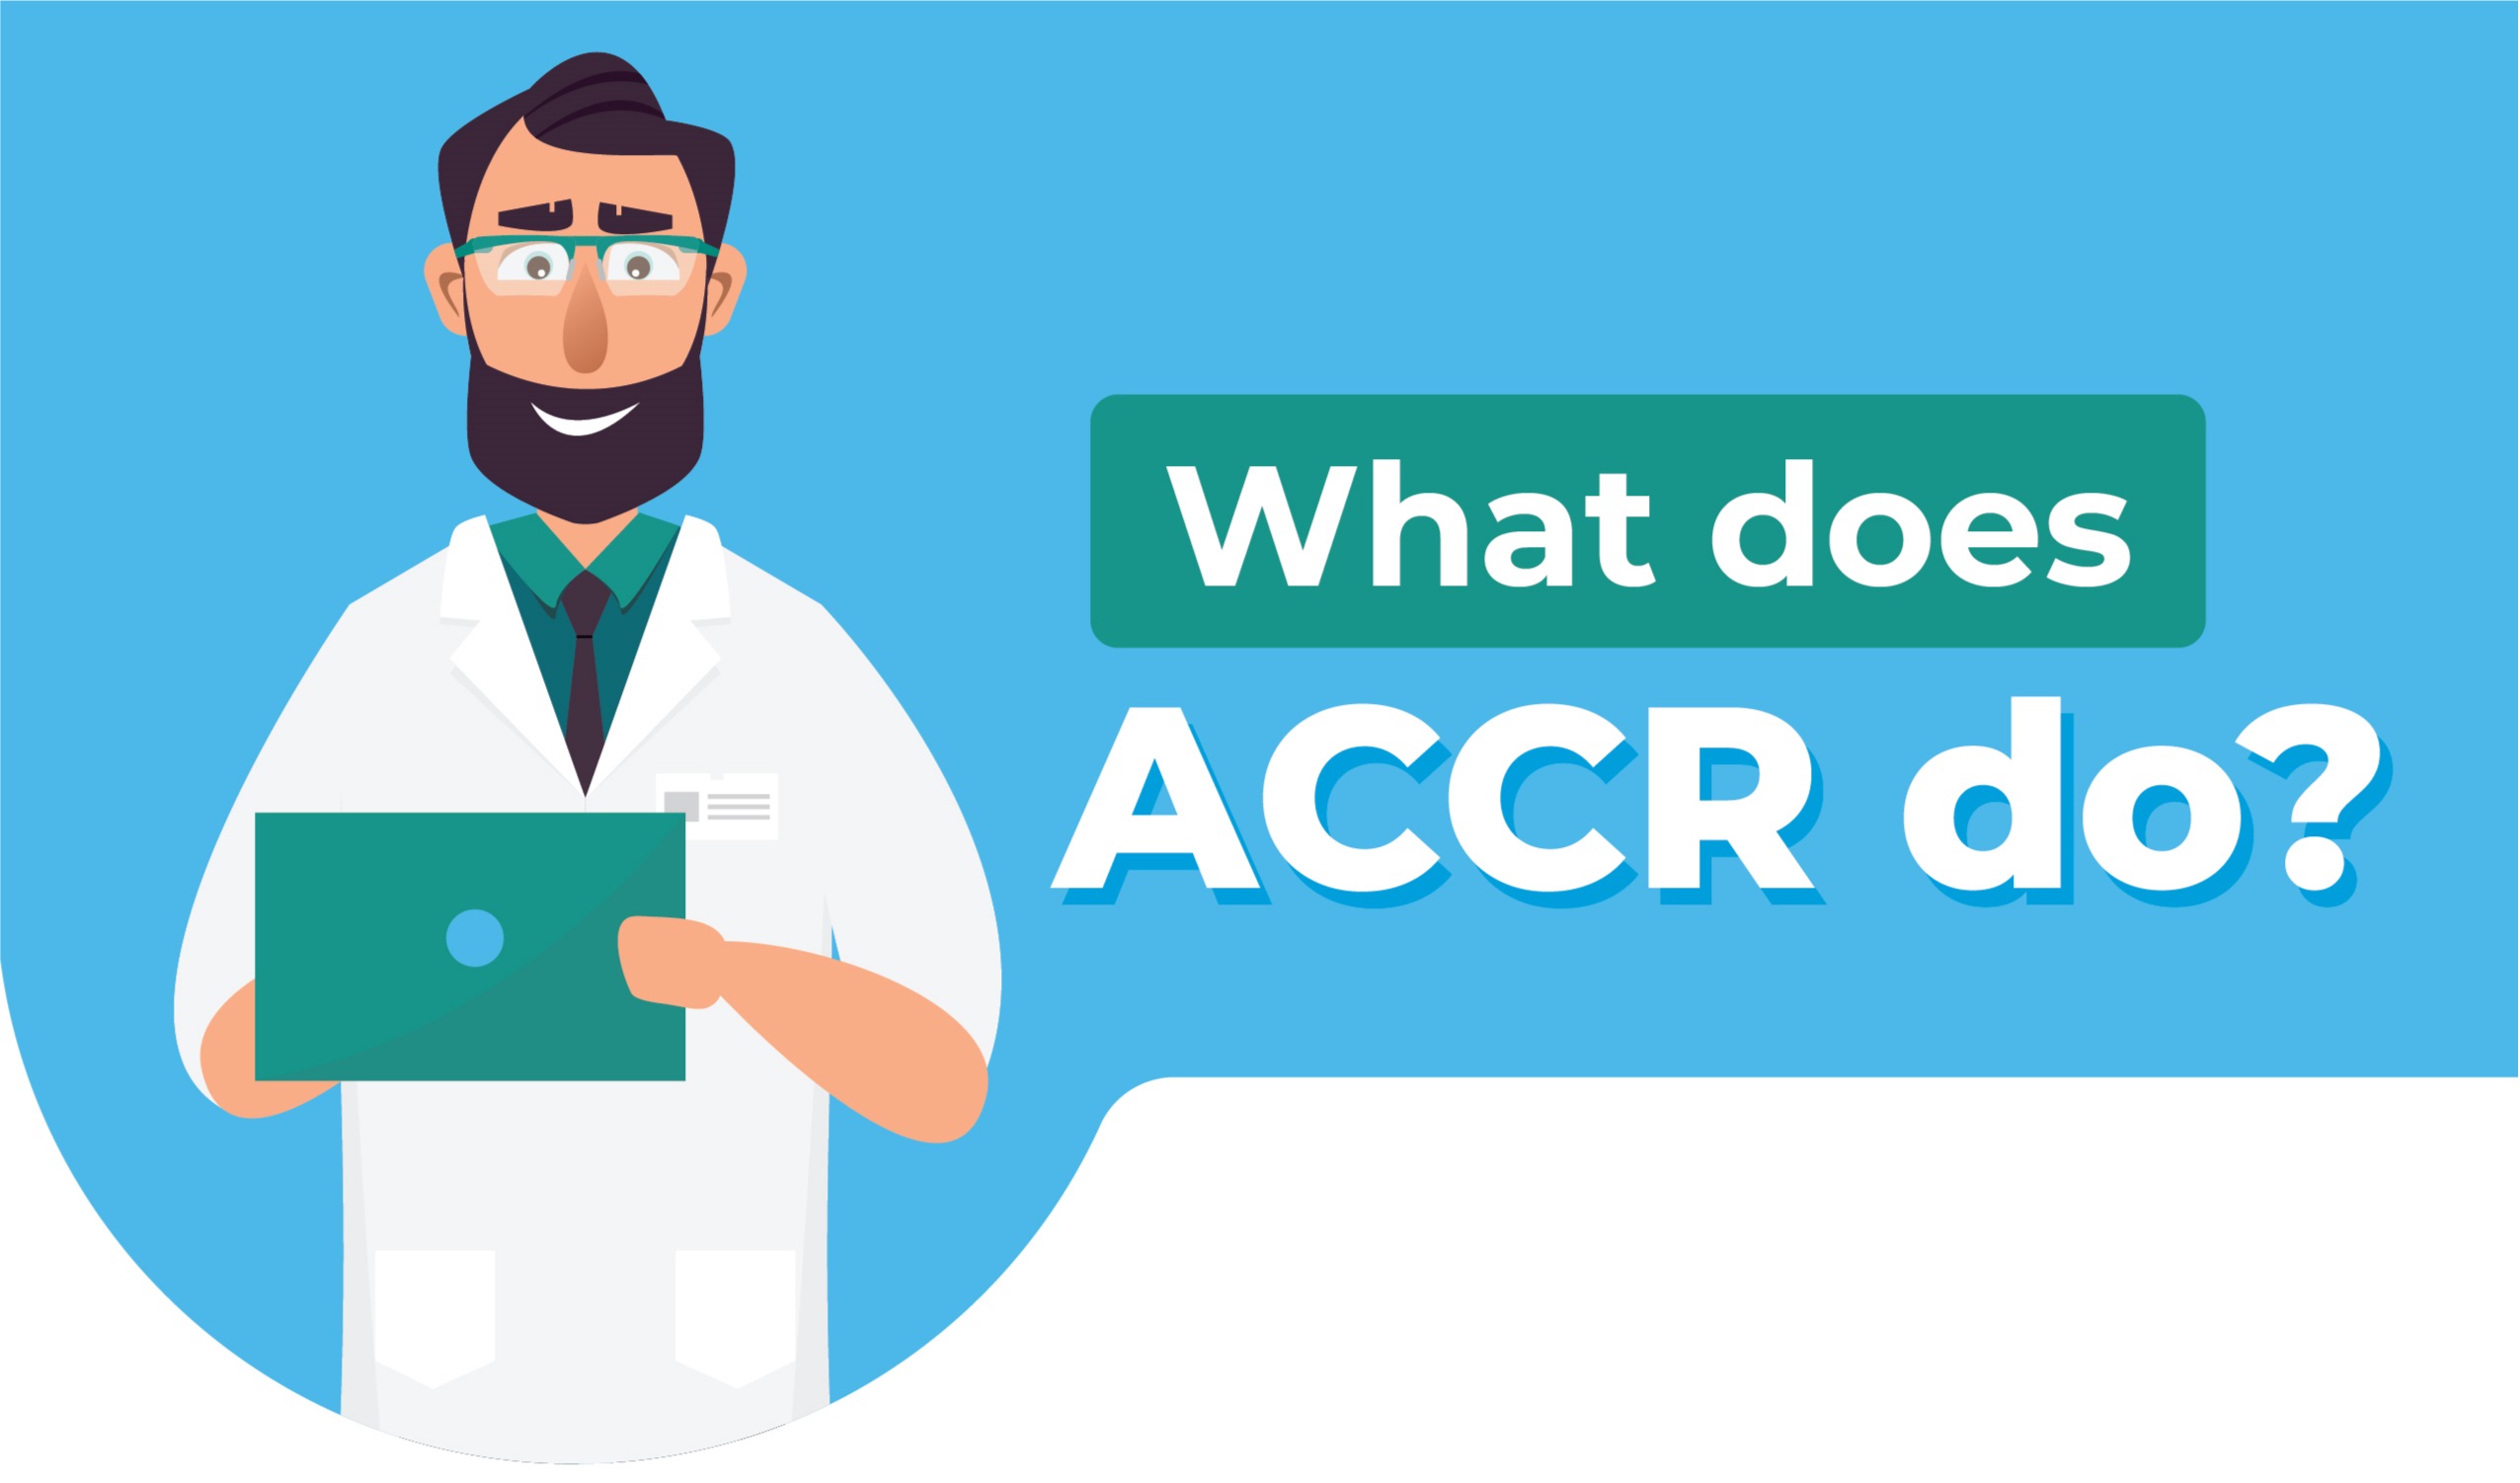 What does ACCR do?